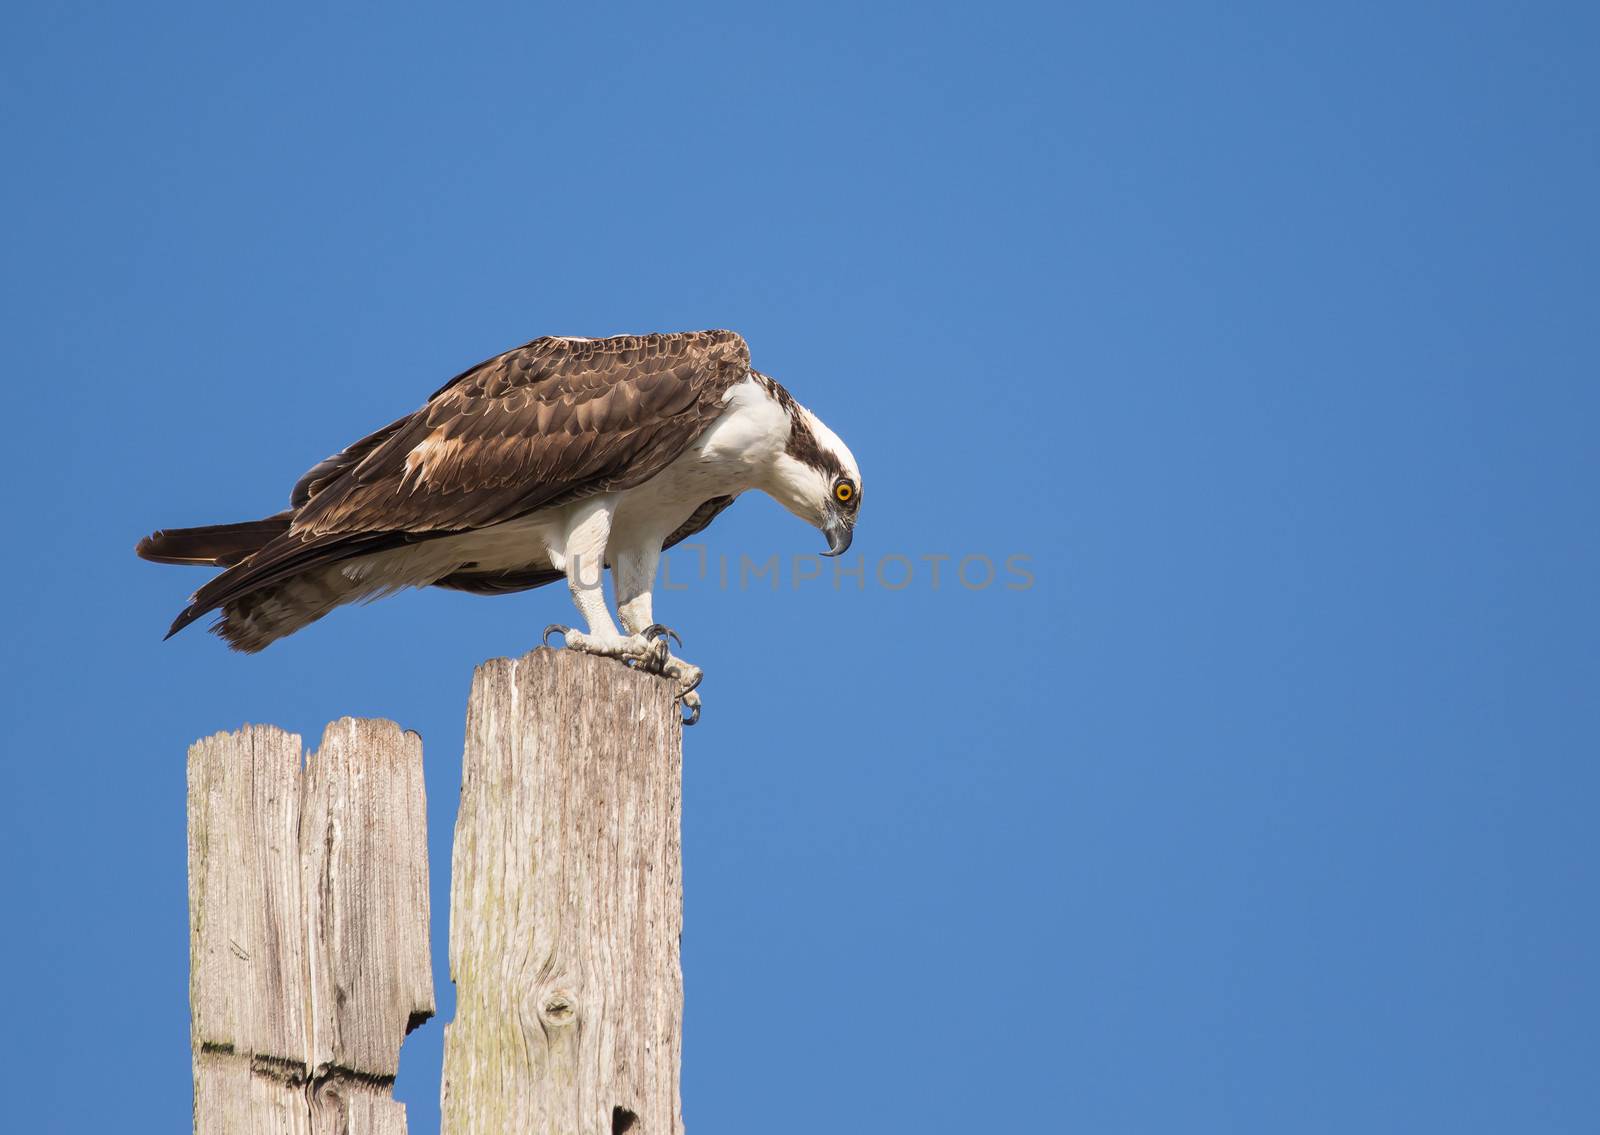 This Osprey is intently staring into the waters of the bay for unsuspecting fish.